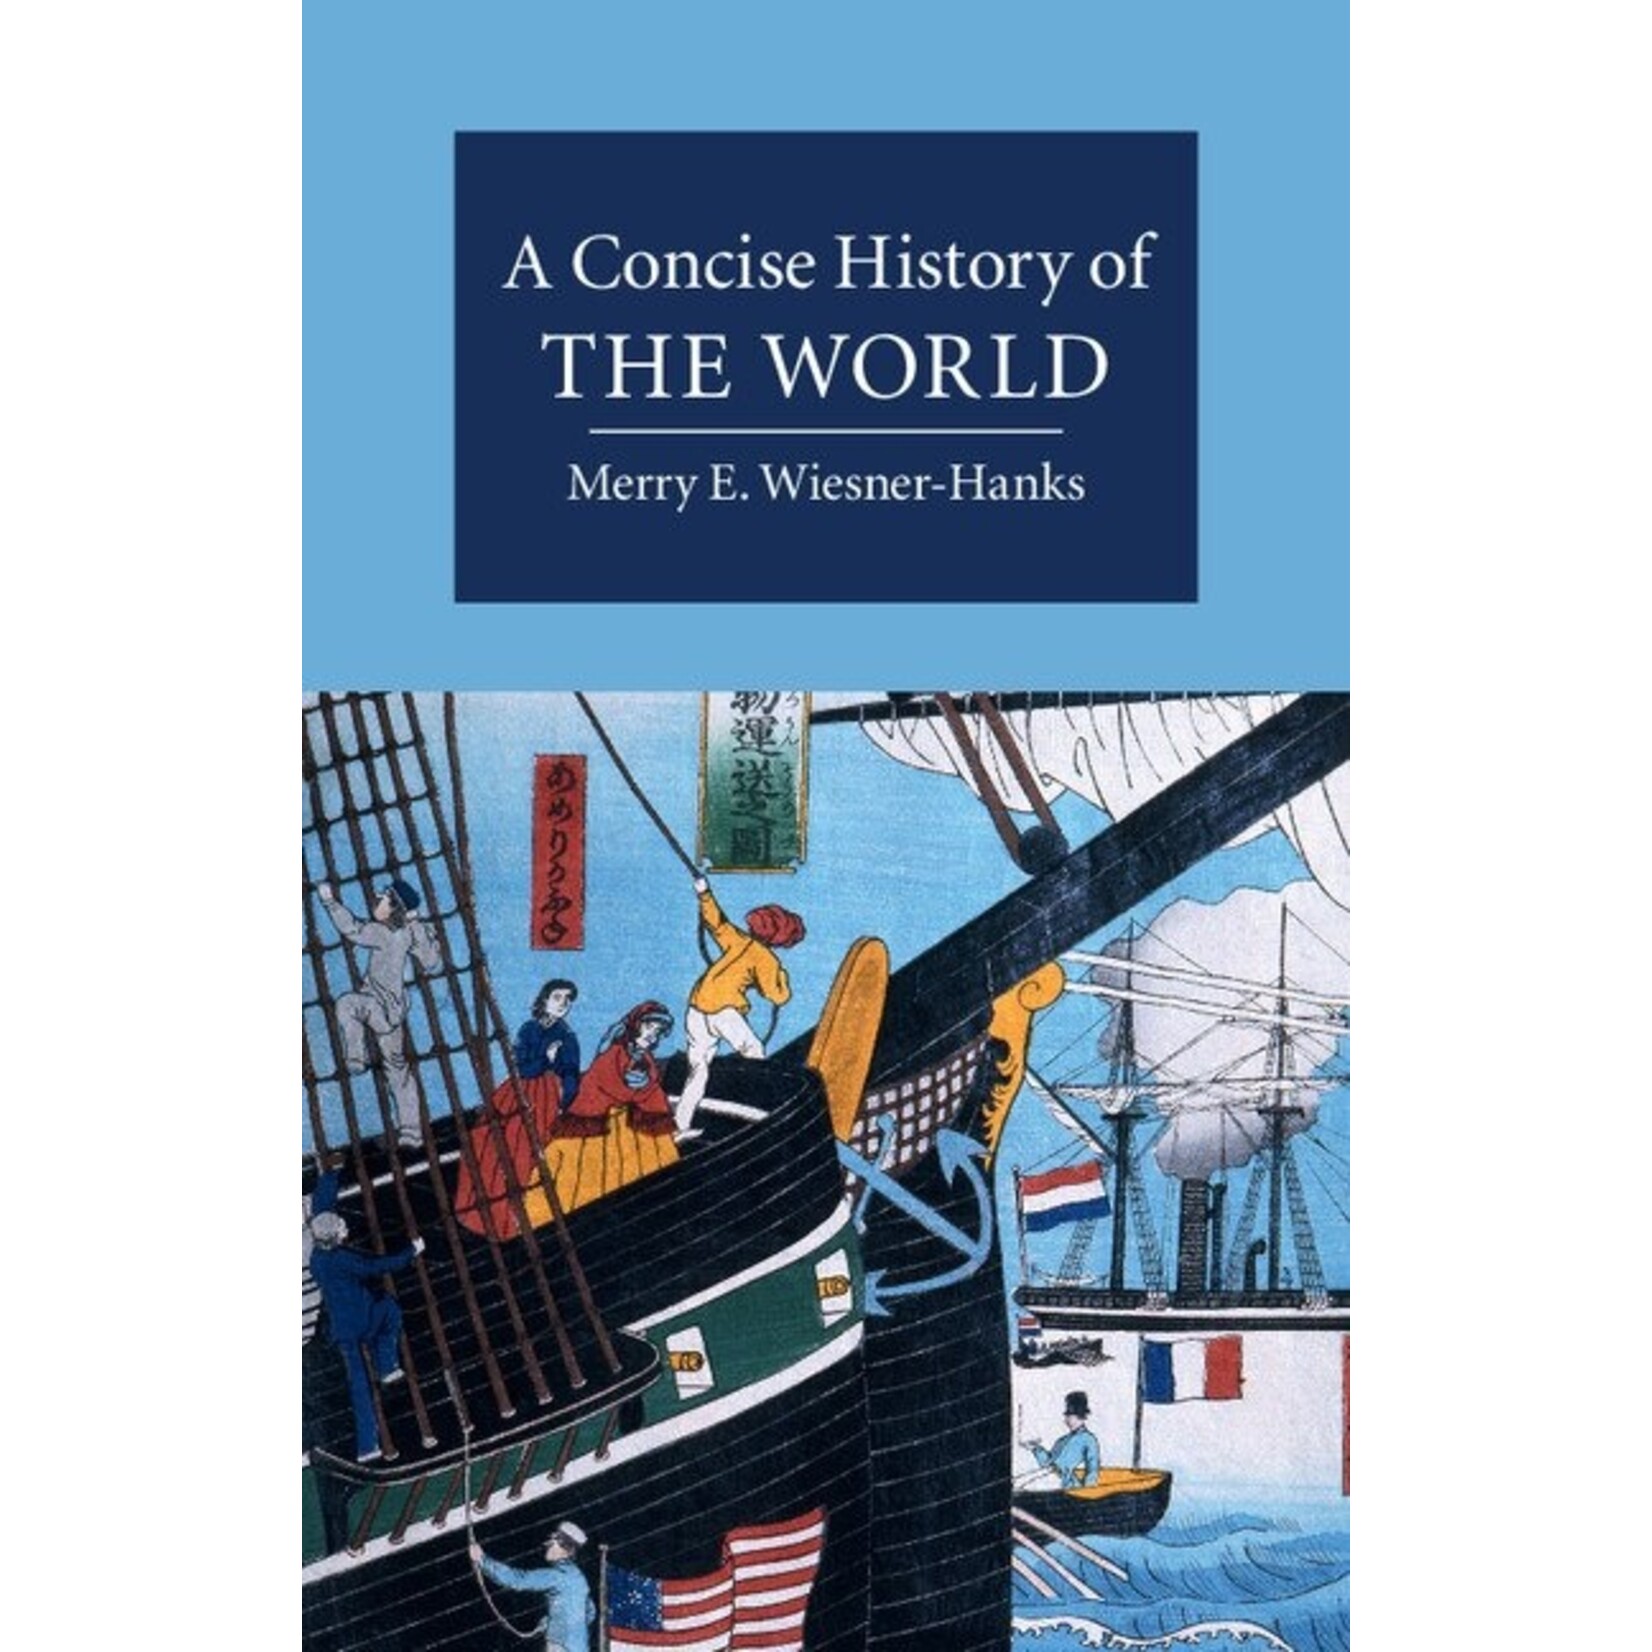 A Concise History of the World